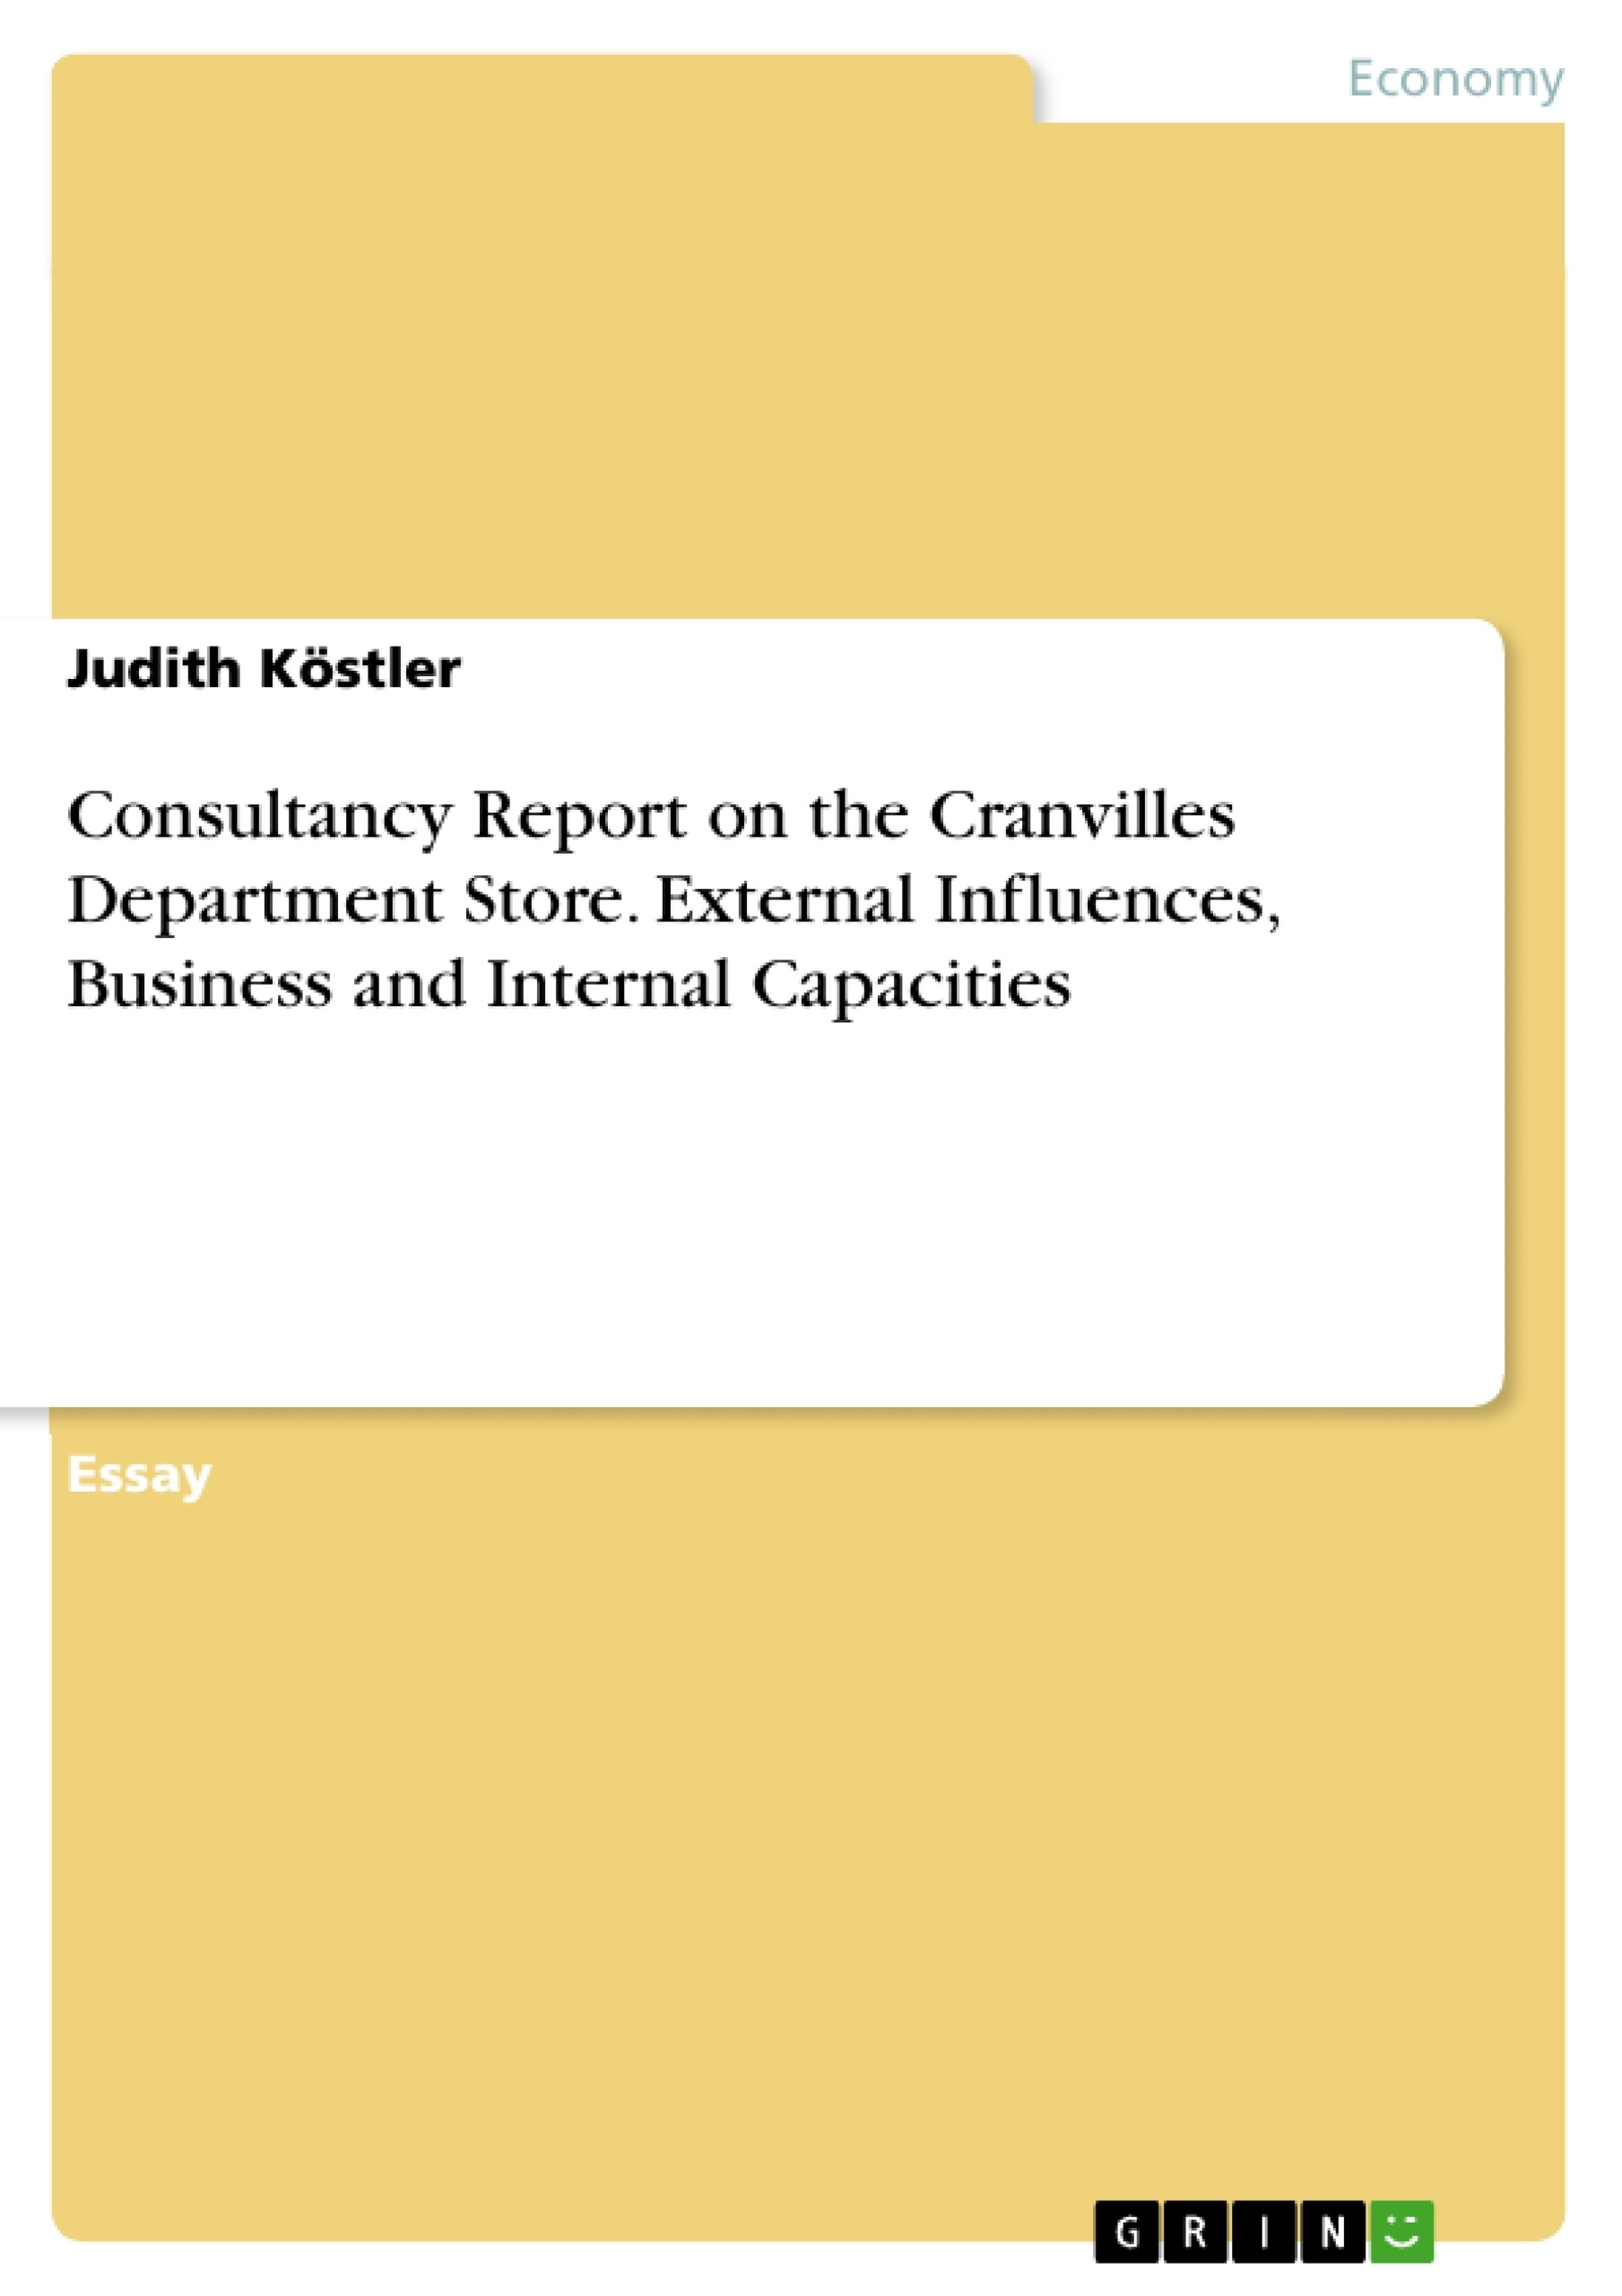 Titre: Consultancy Report on the Cranvilles Department Store. External Influences, Business and Internal Capacities